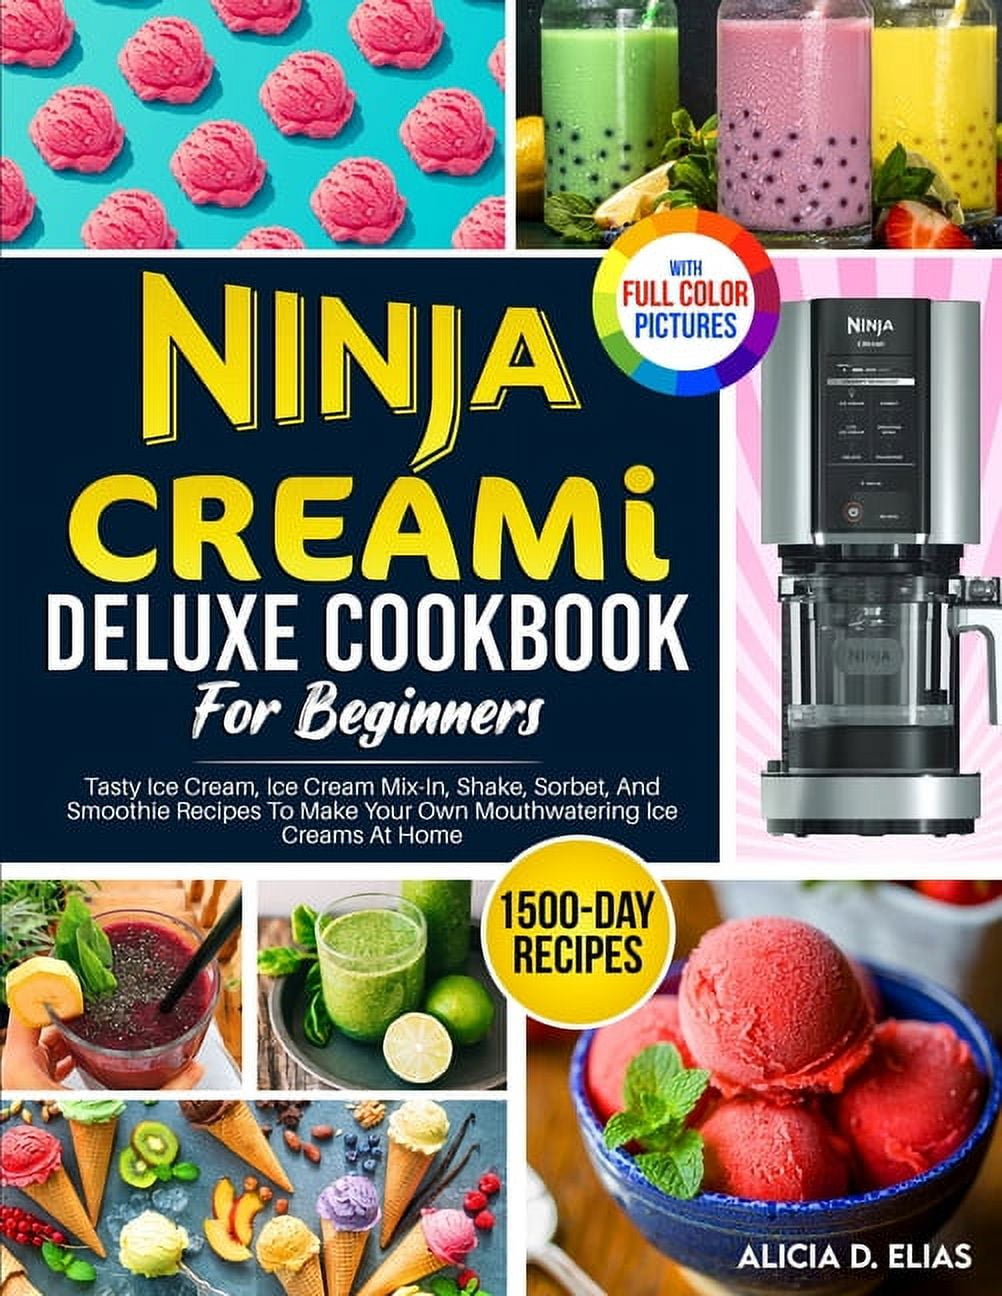 1500 DASH Ice Cream Maker Cookbook: The Easy, Mouthwatering and